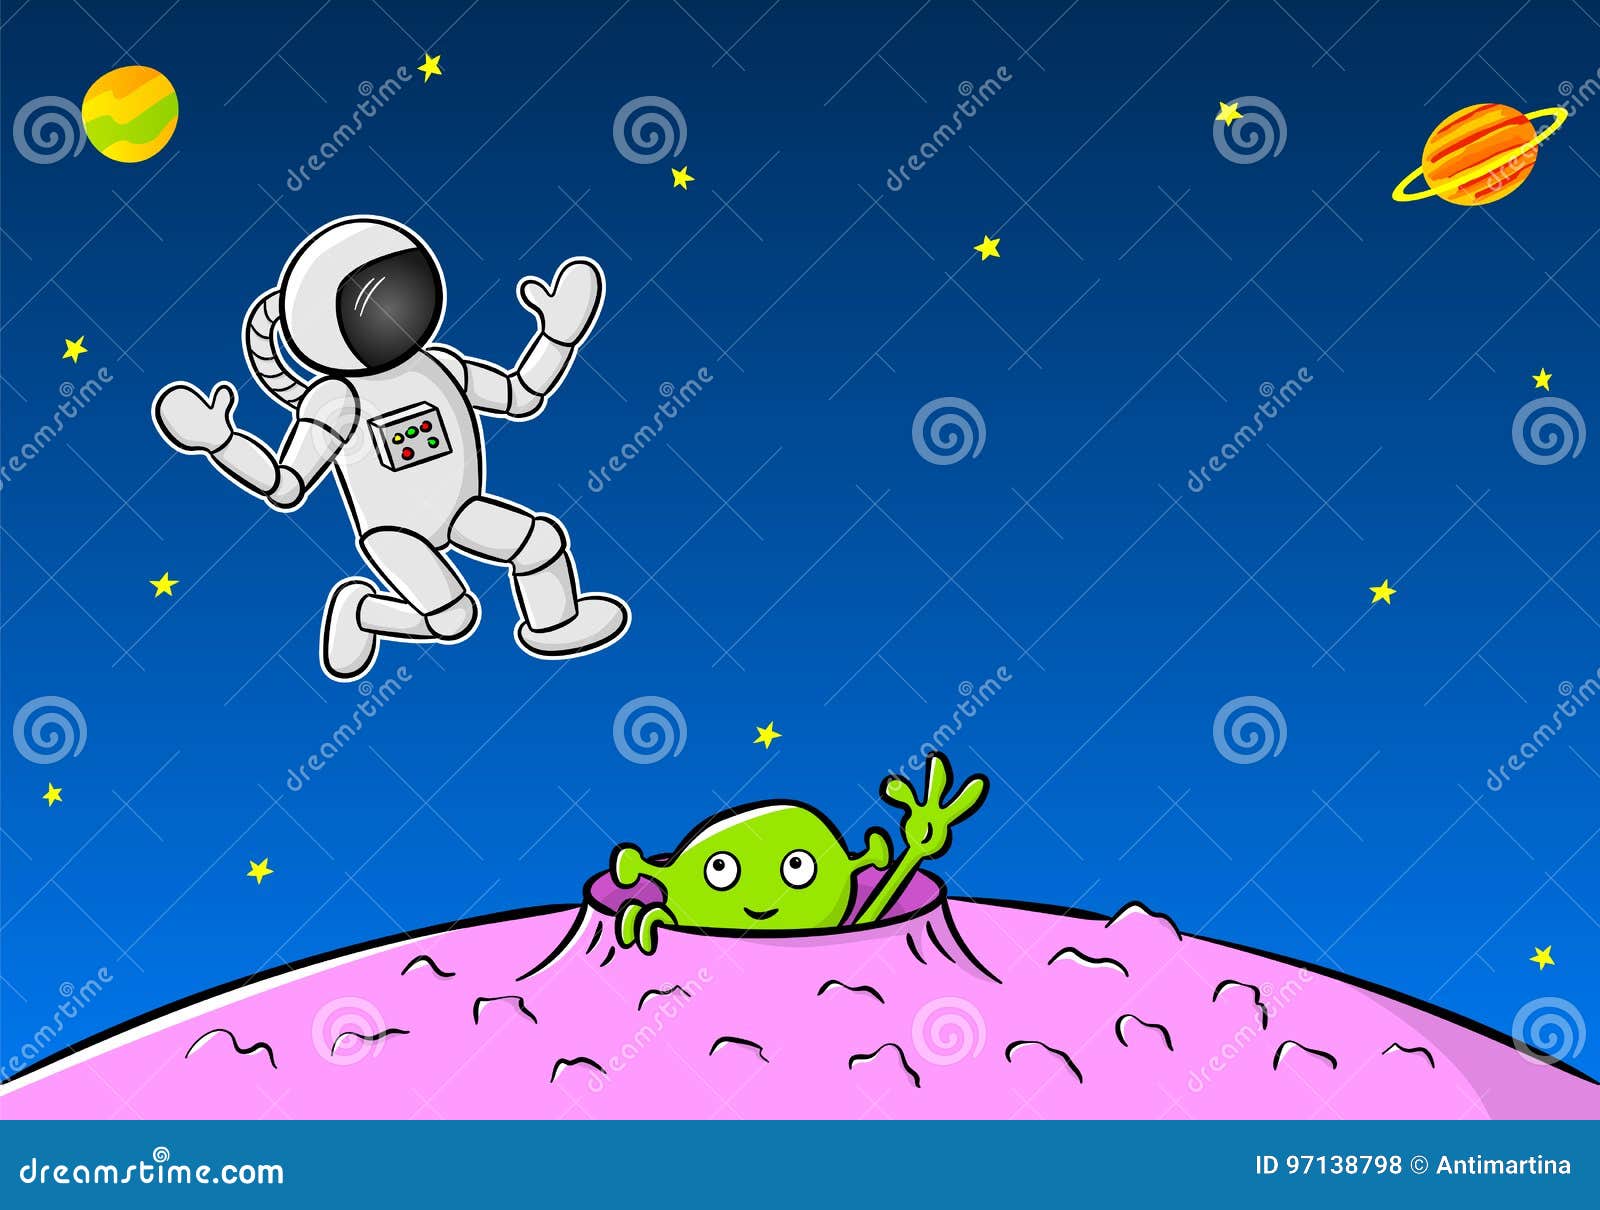 green extraterrestrial waving to an astronaut